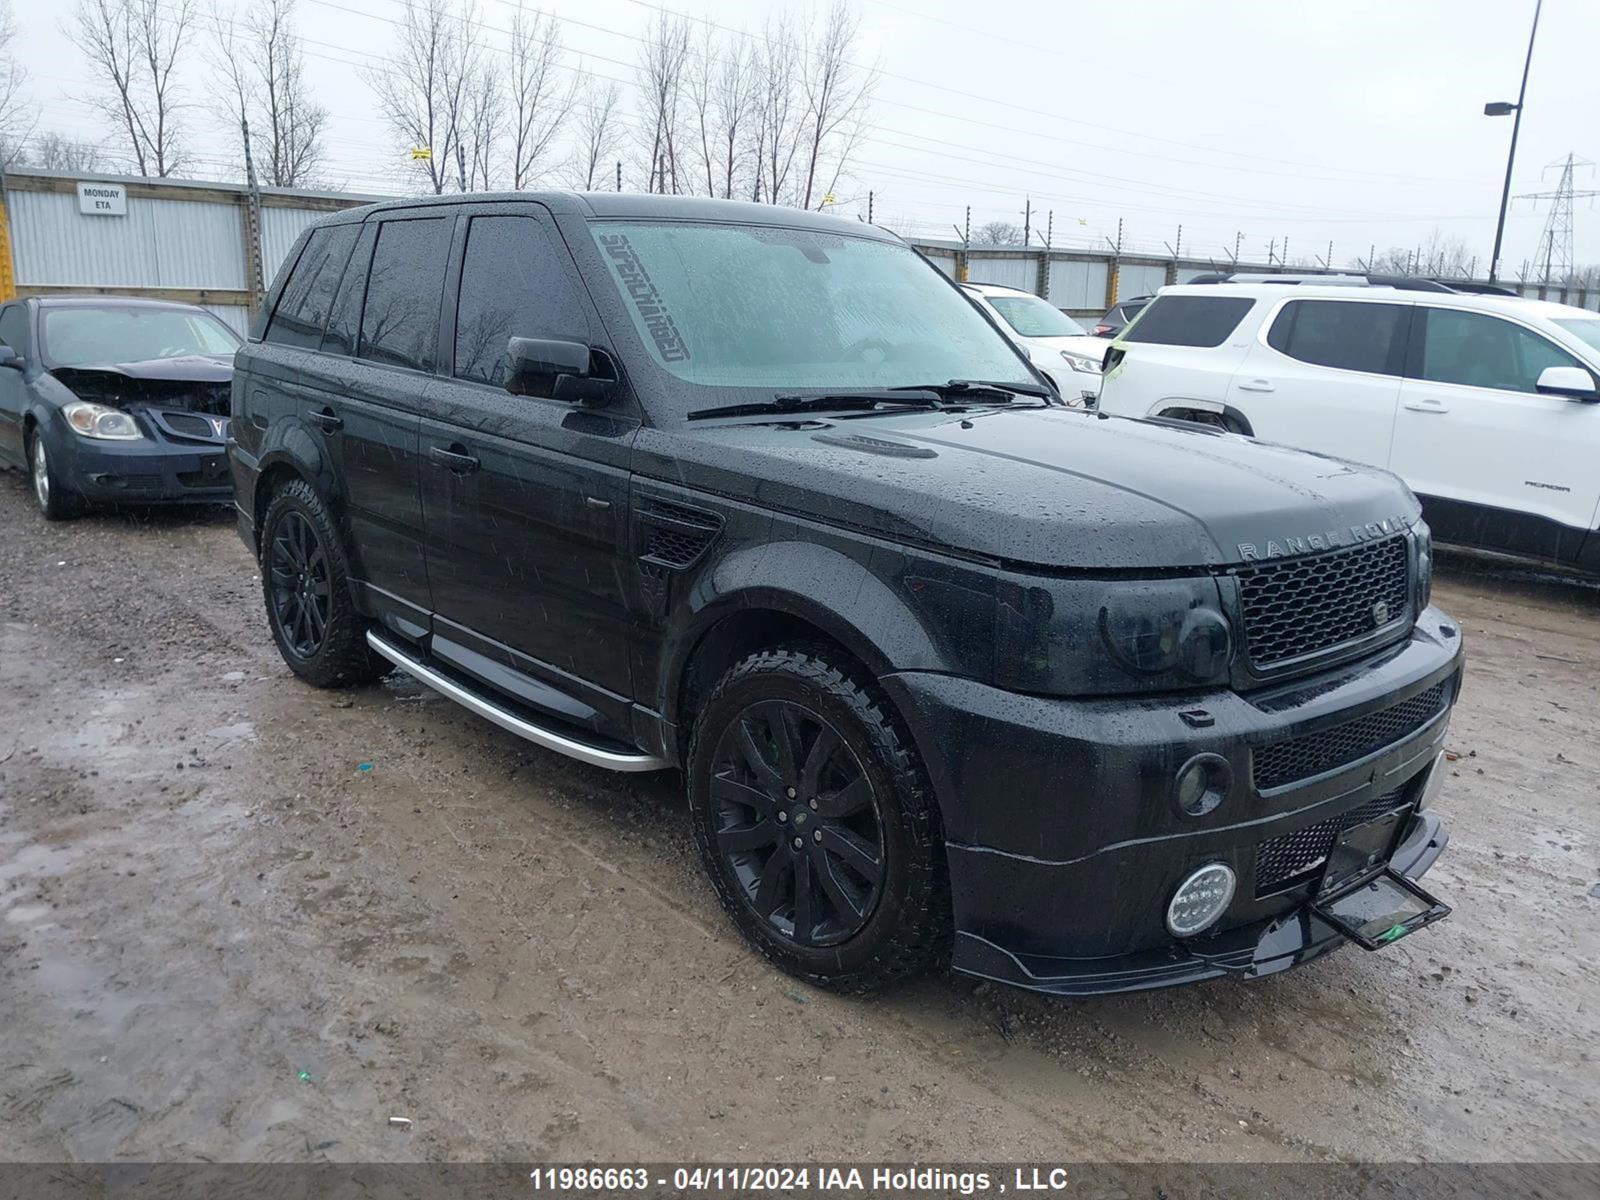 vin: SALSH23418A172516 SALSH23418A172516 2008 land rover range rover sport 4200 for Sale in n5w6b8, 1900 Gore Road , London, Ontario, Canada